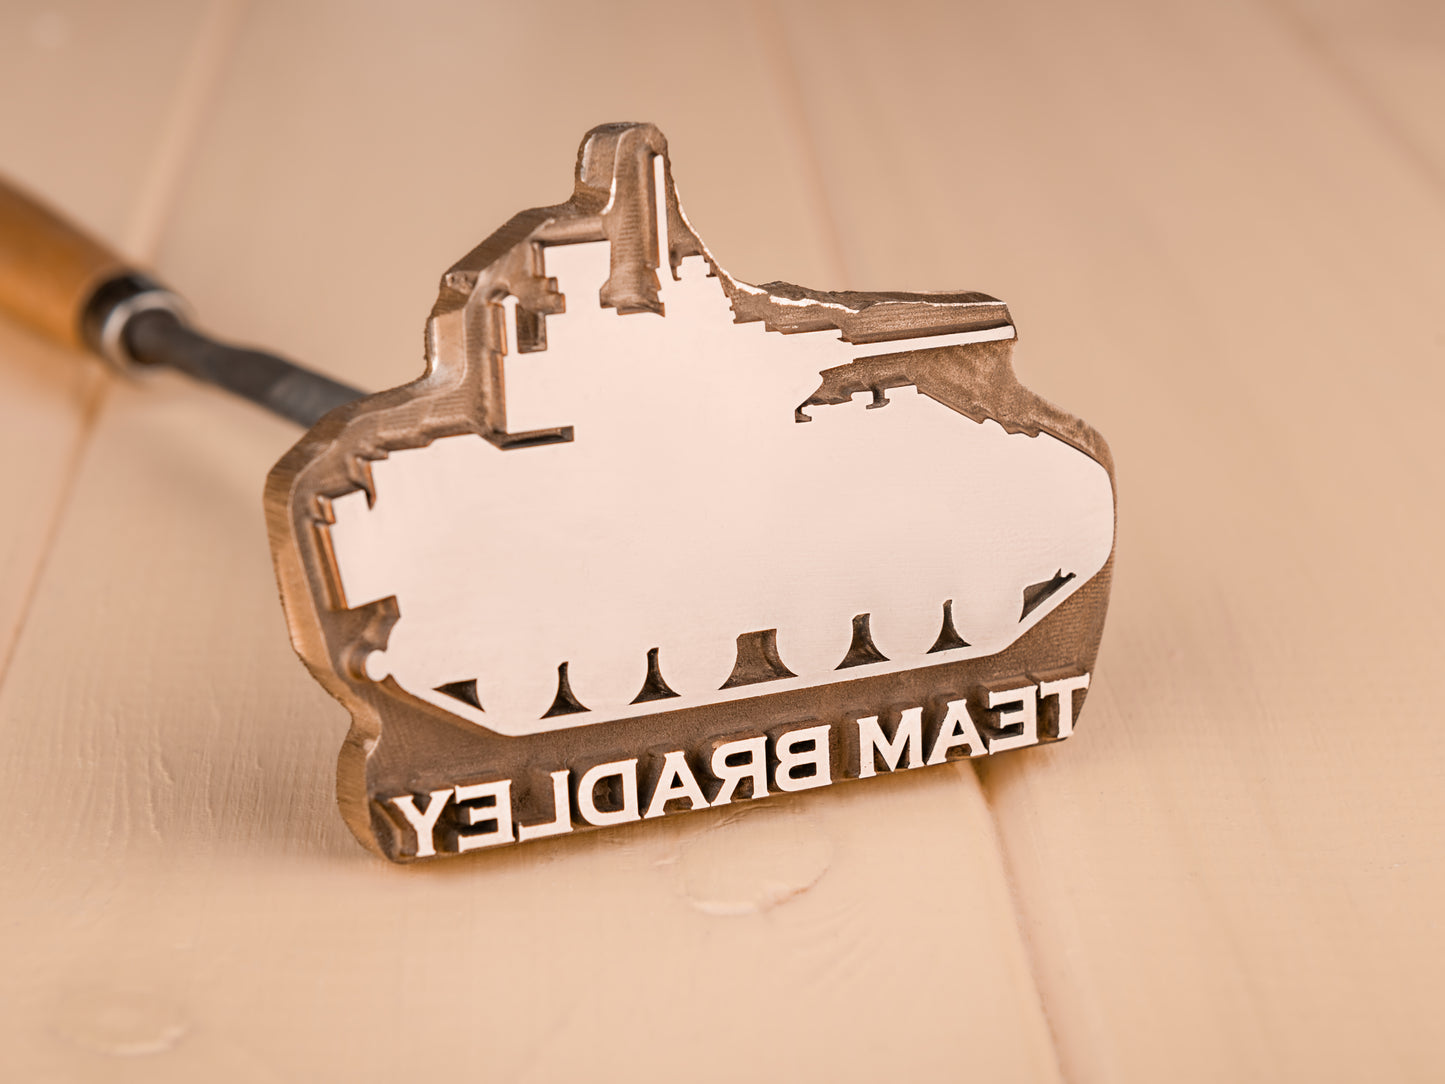 Custom Branding Iron Stamp for Burgers, BBQ and Steaks